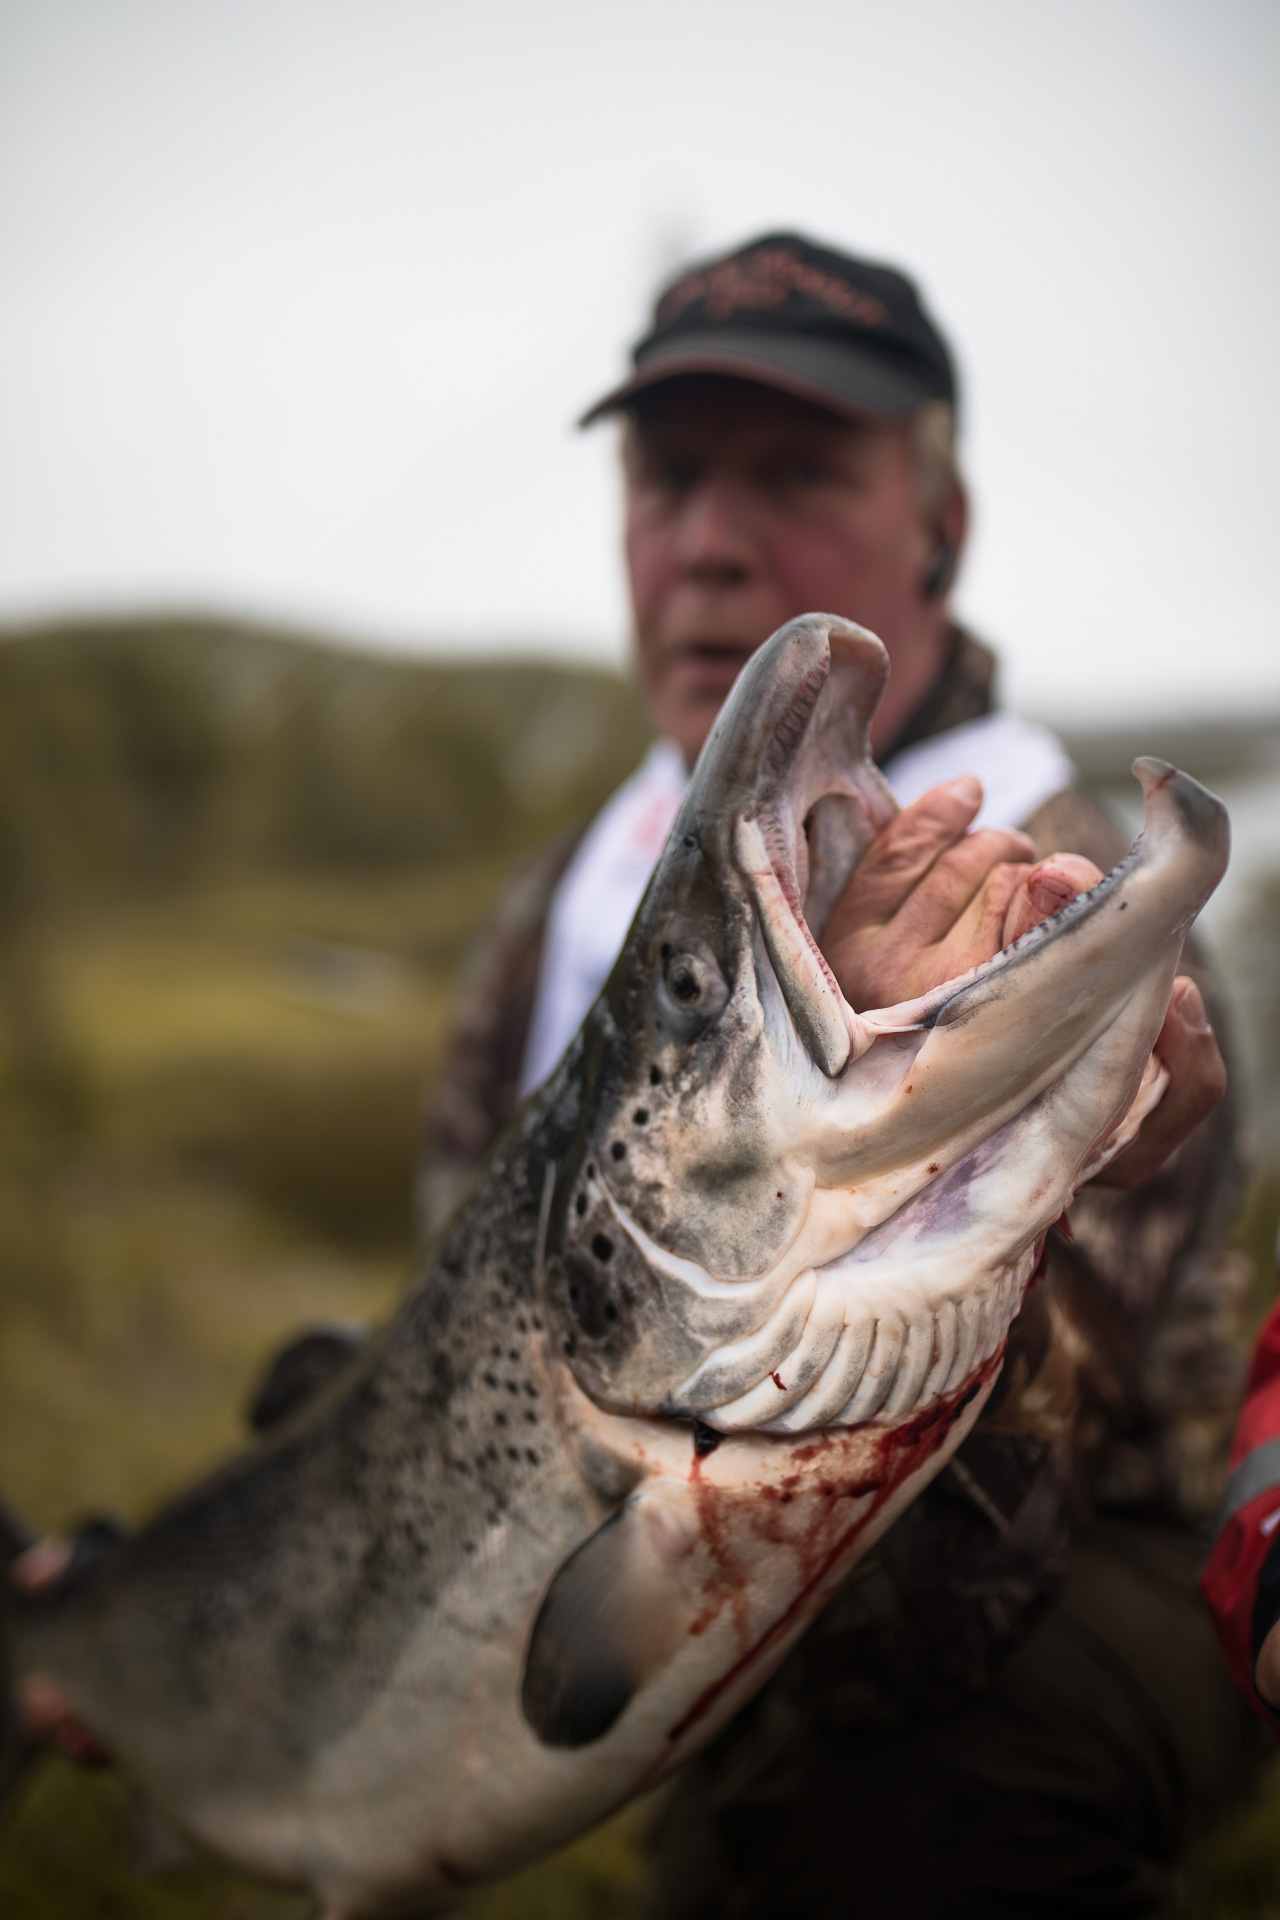 Swedish fishing pike lures, which are worth taking in your fishing kit.